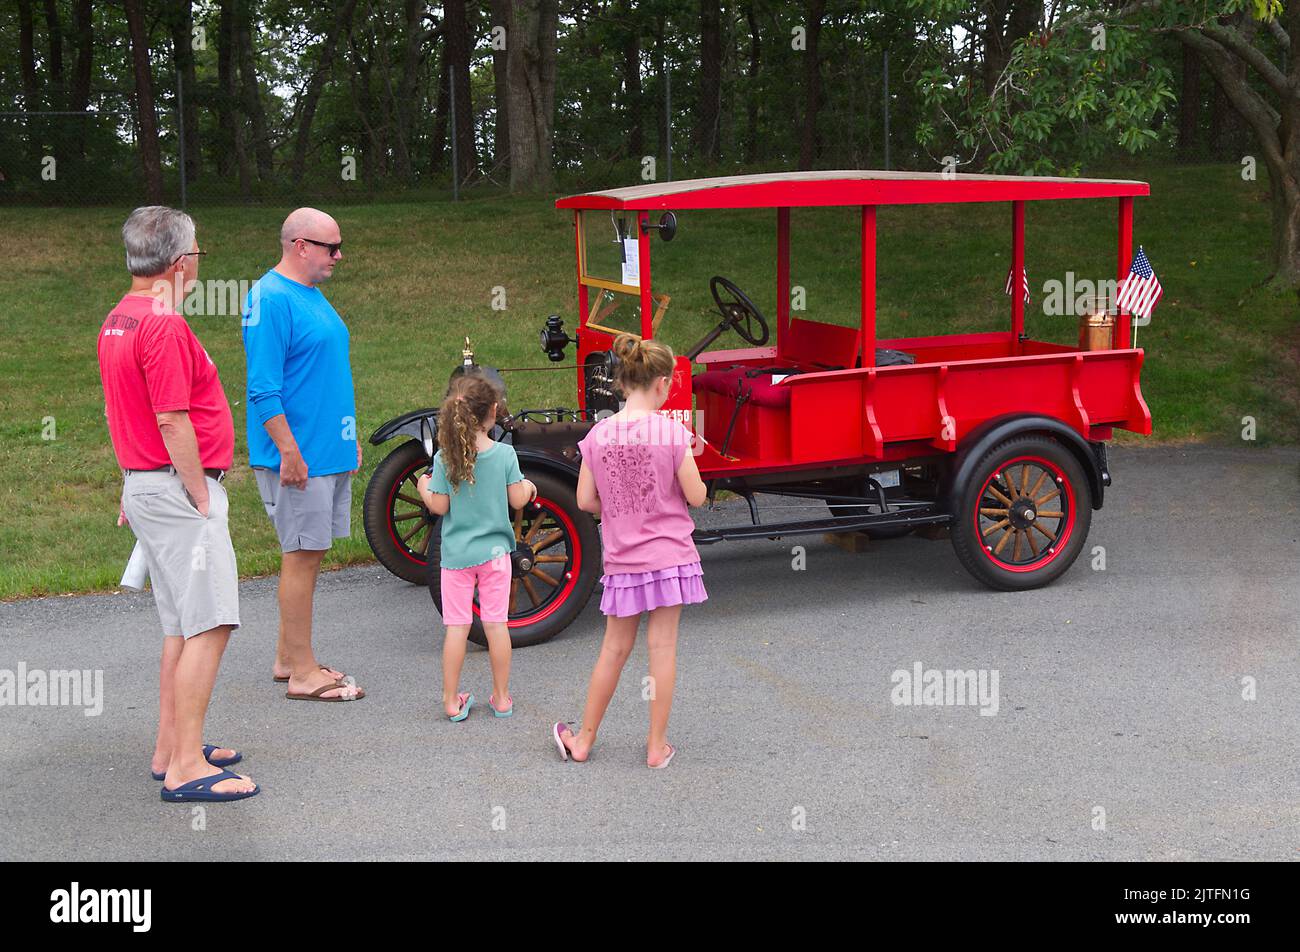 A family group looks over a 1925 Ford Depot Hack on display at a vintage car show in Dennis, Massachusetts on Cape Cod Stock Photo